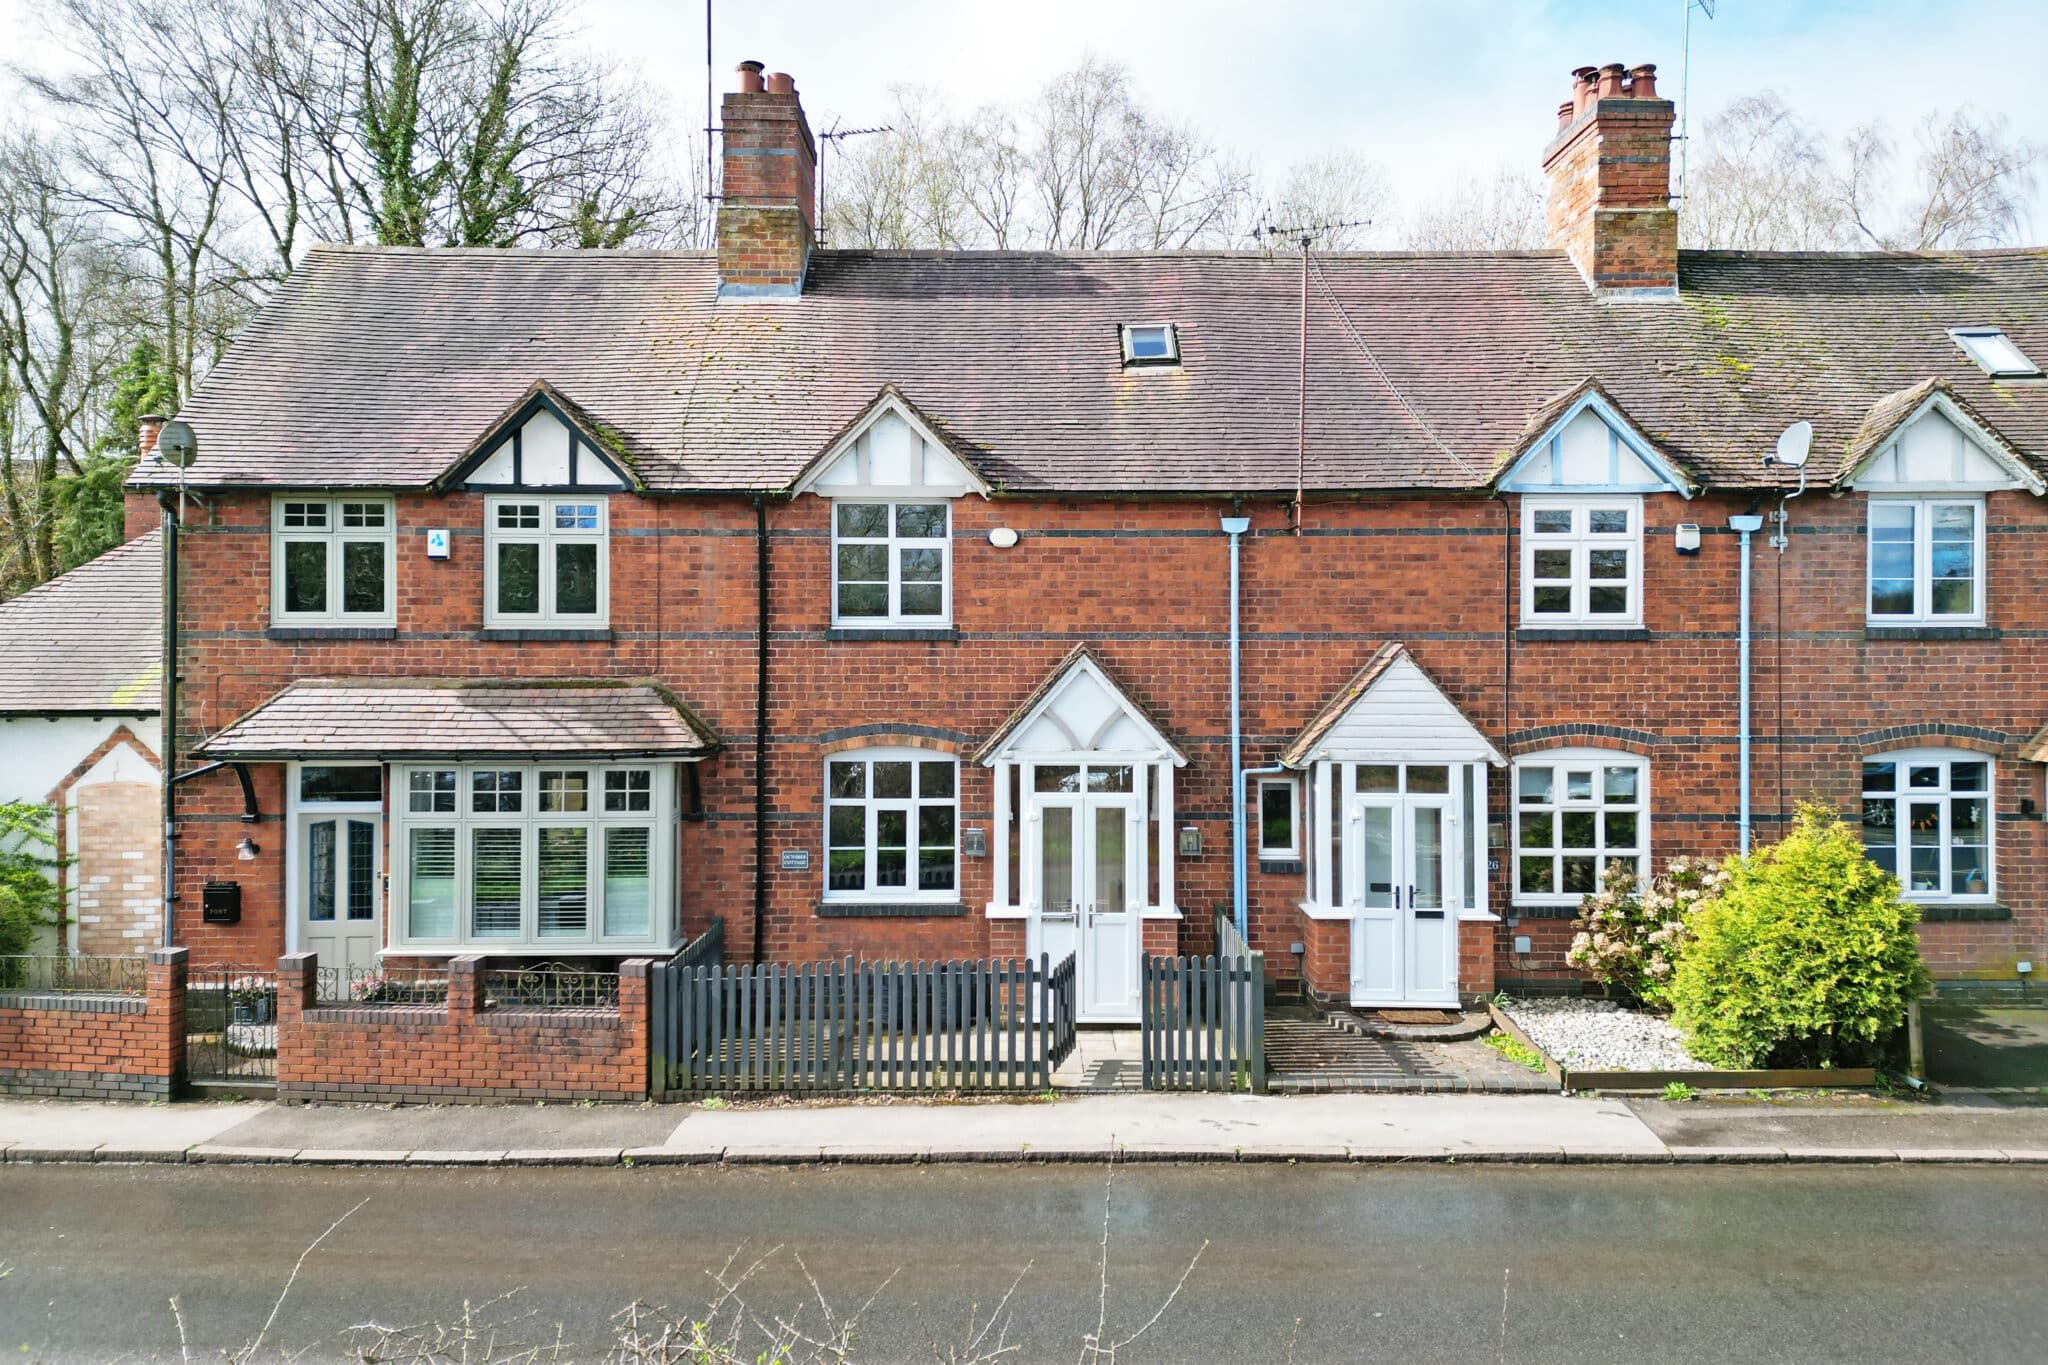 October Cottage, 128 Darley Green Road, Knowle, Solihull, Solihull, B93 8PN